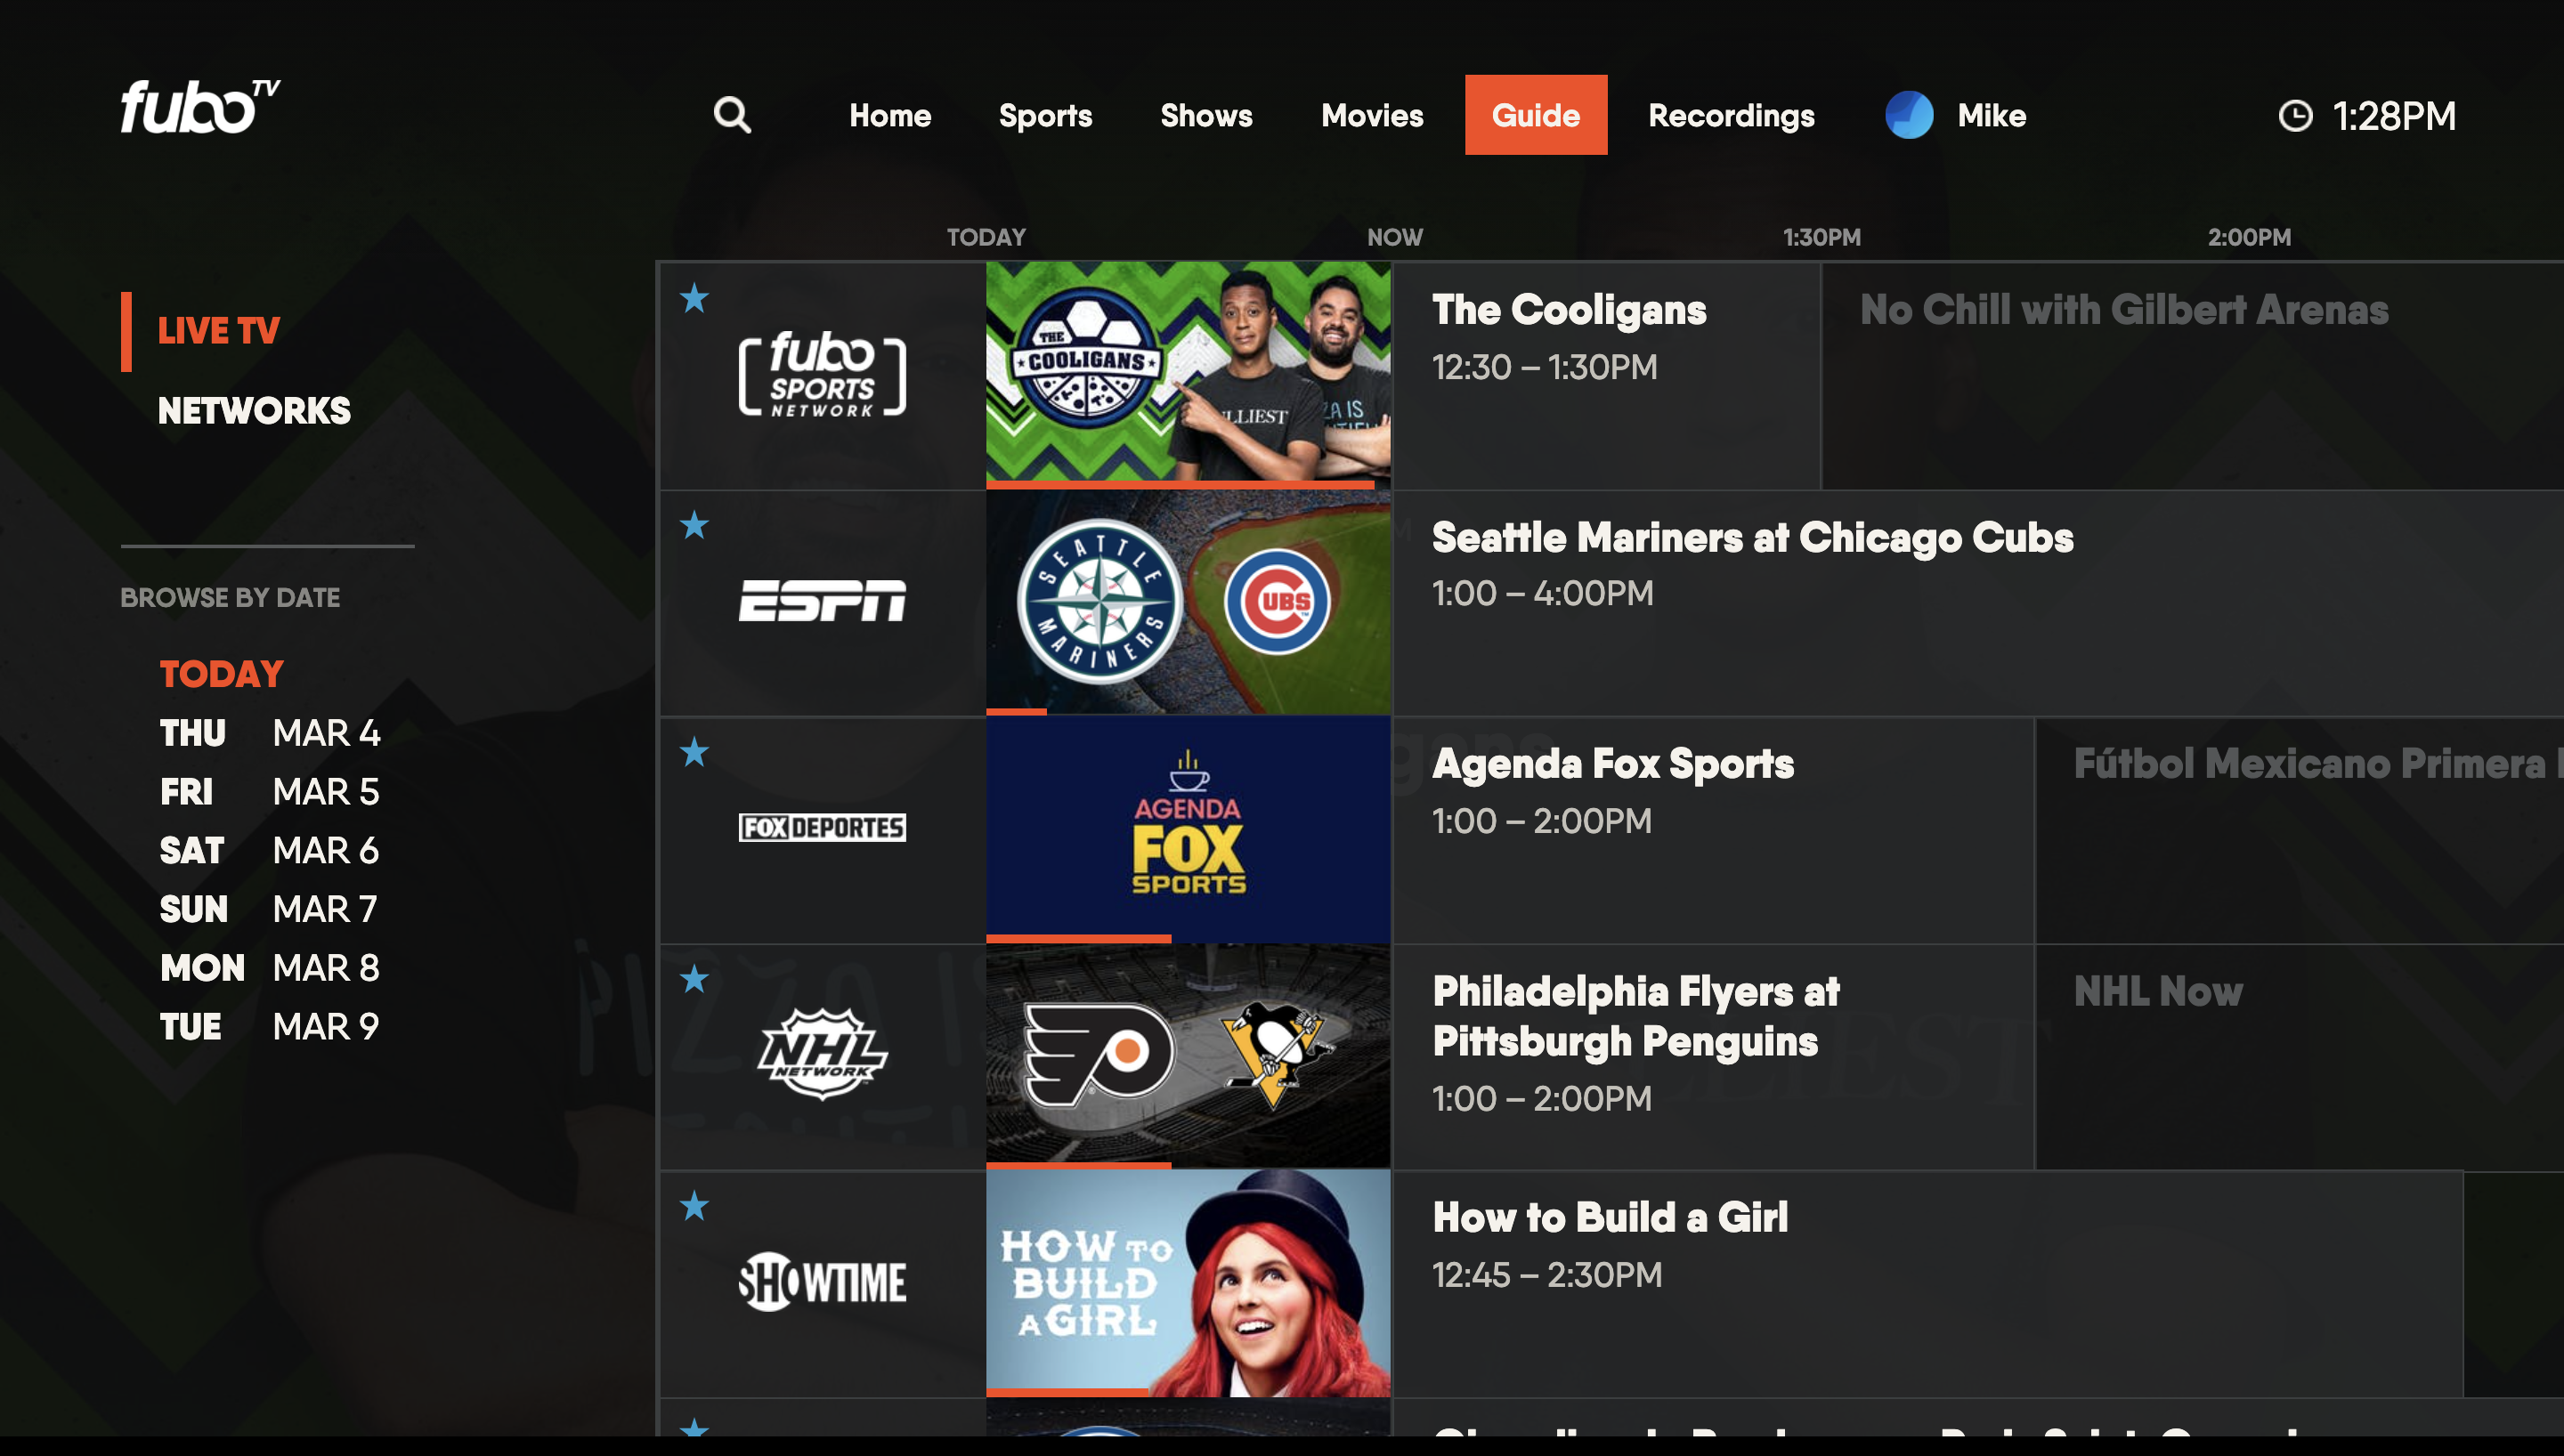 The GUIDE screen of the FuboTV app on a Hisense TV